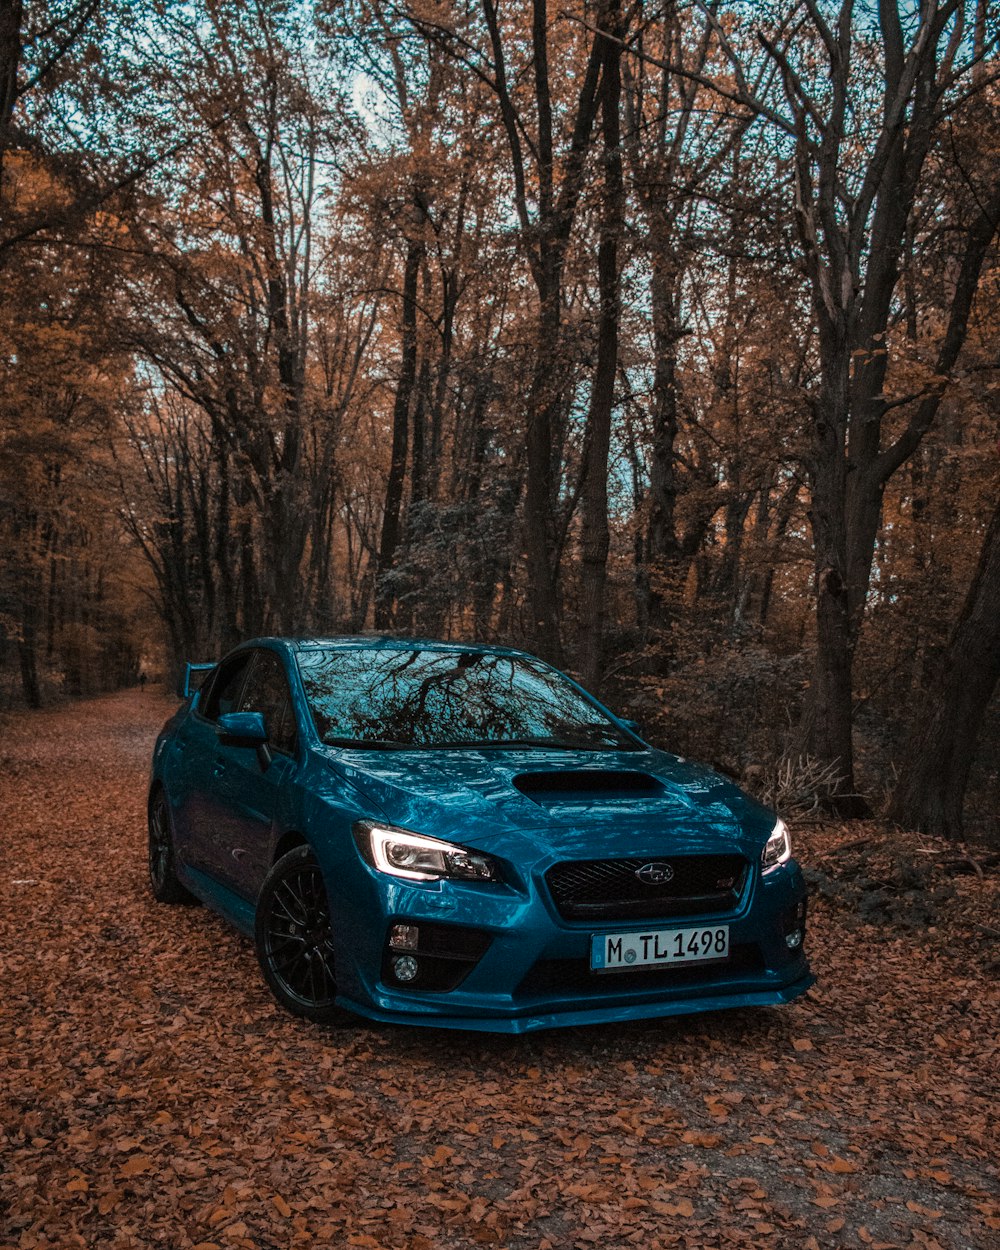 Wrx Pictures | Download Free Images on Unsplash